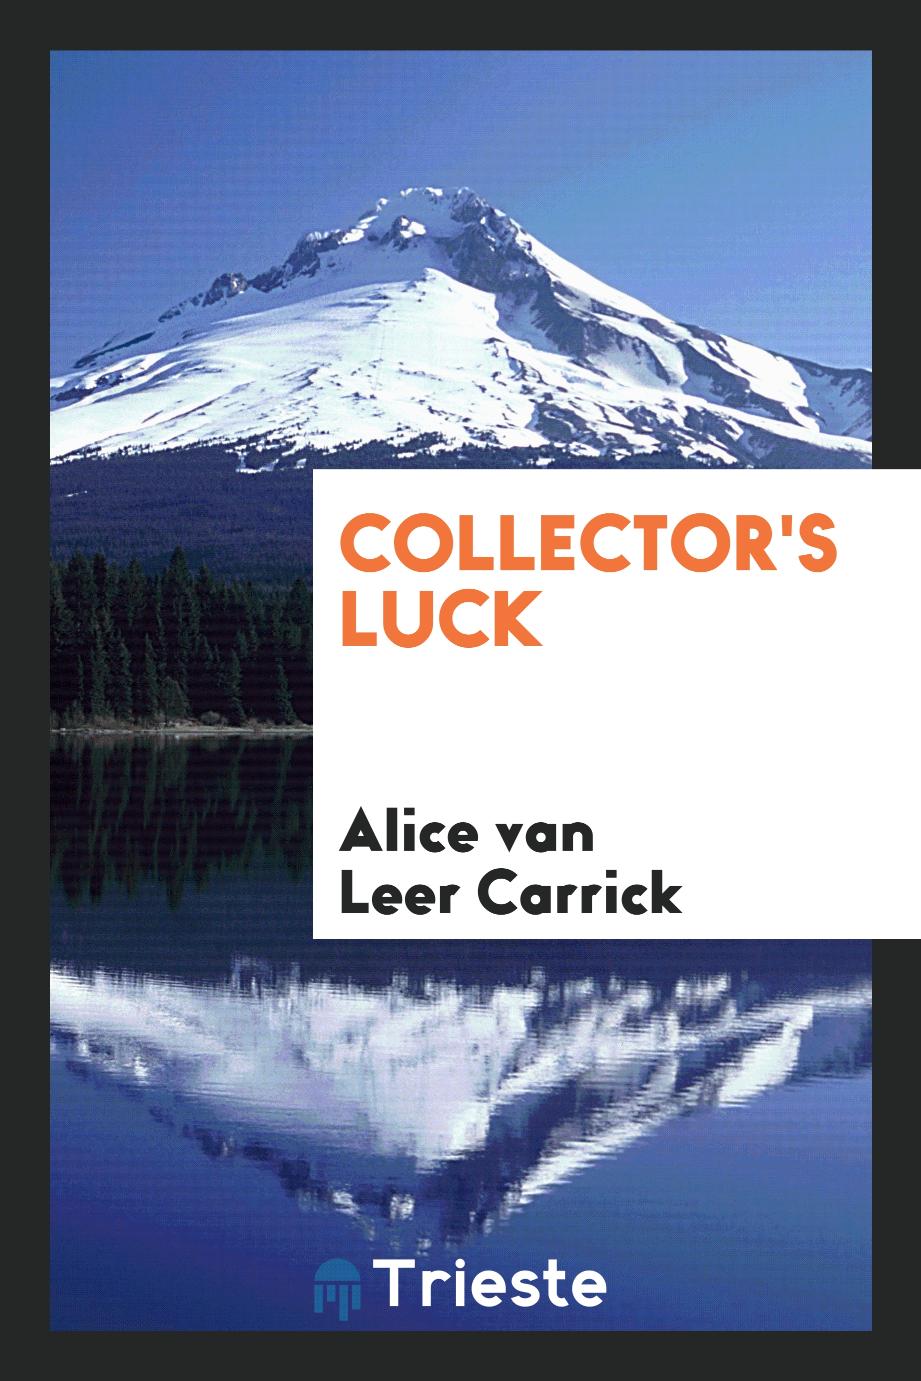 Collector's luck